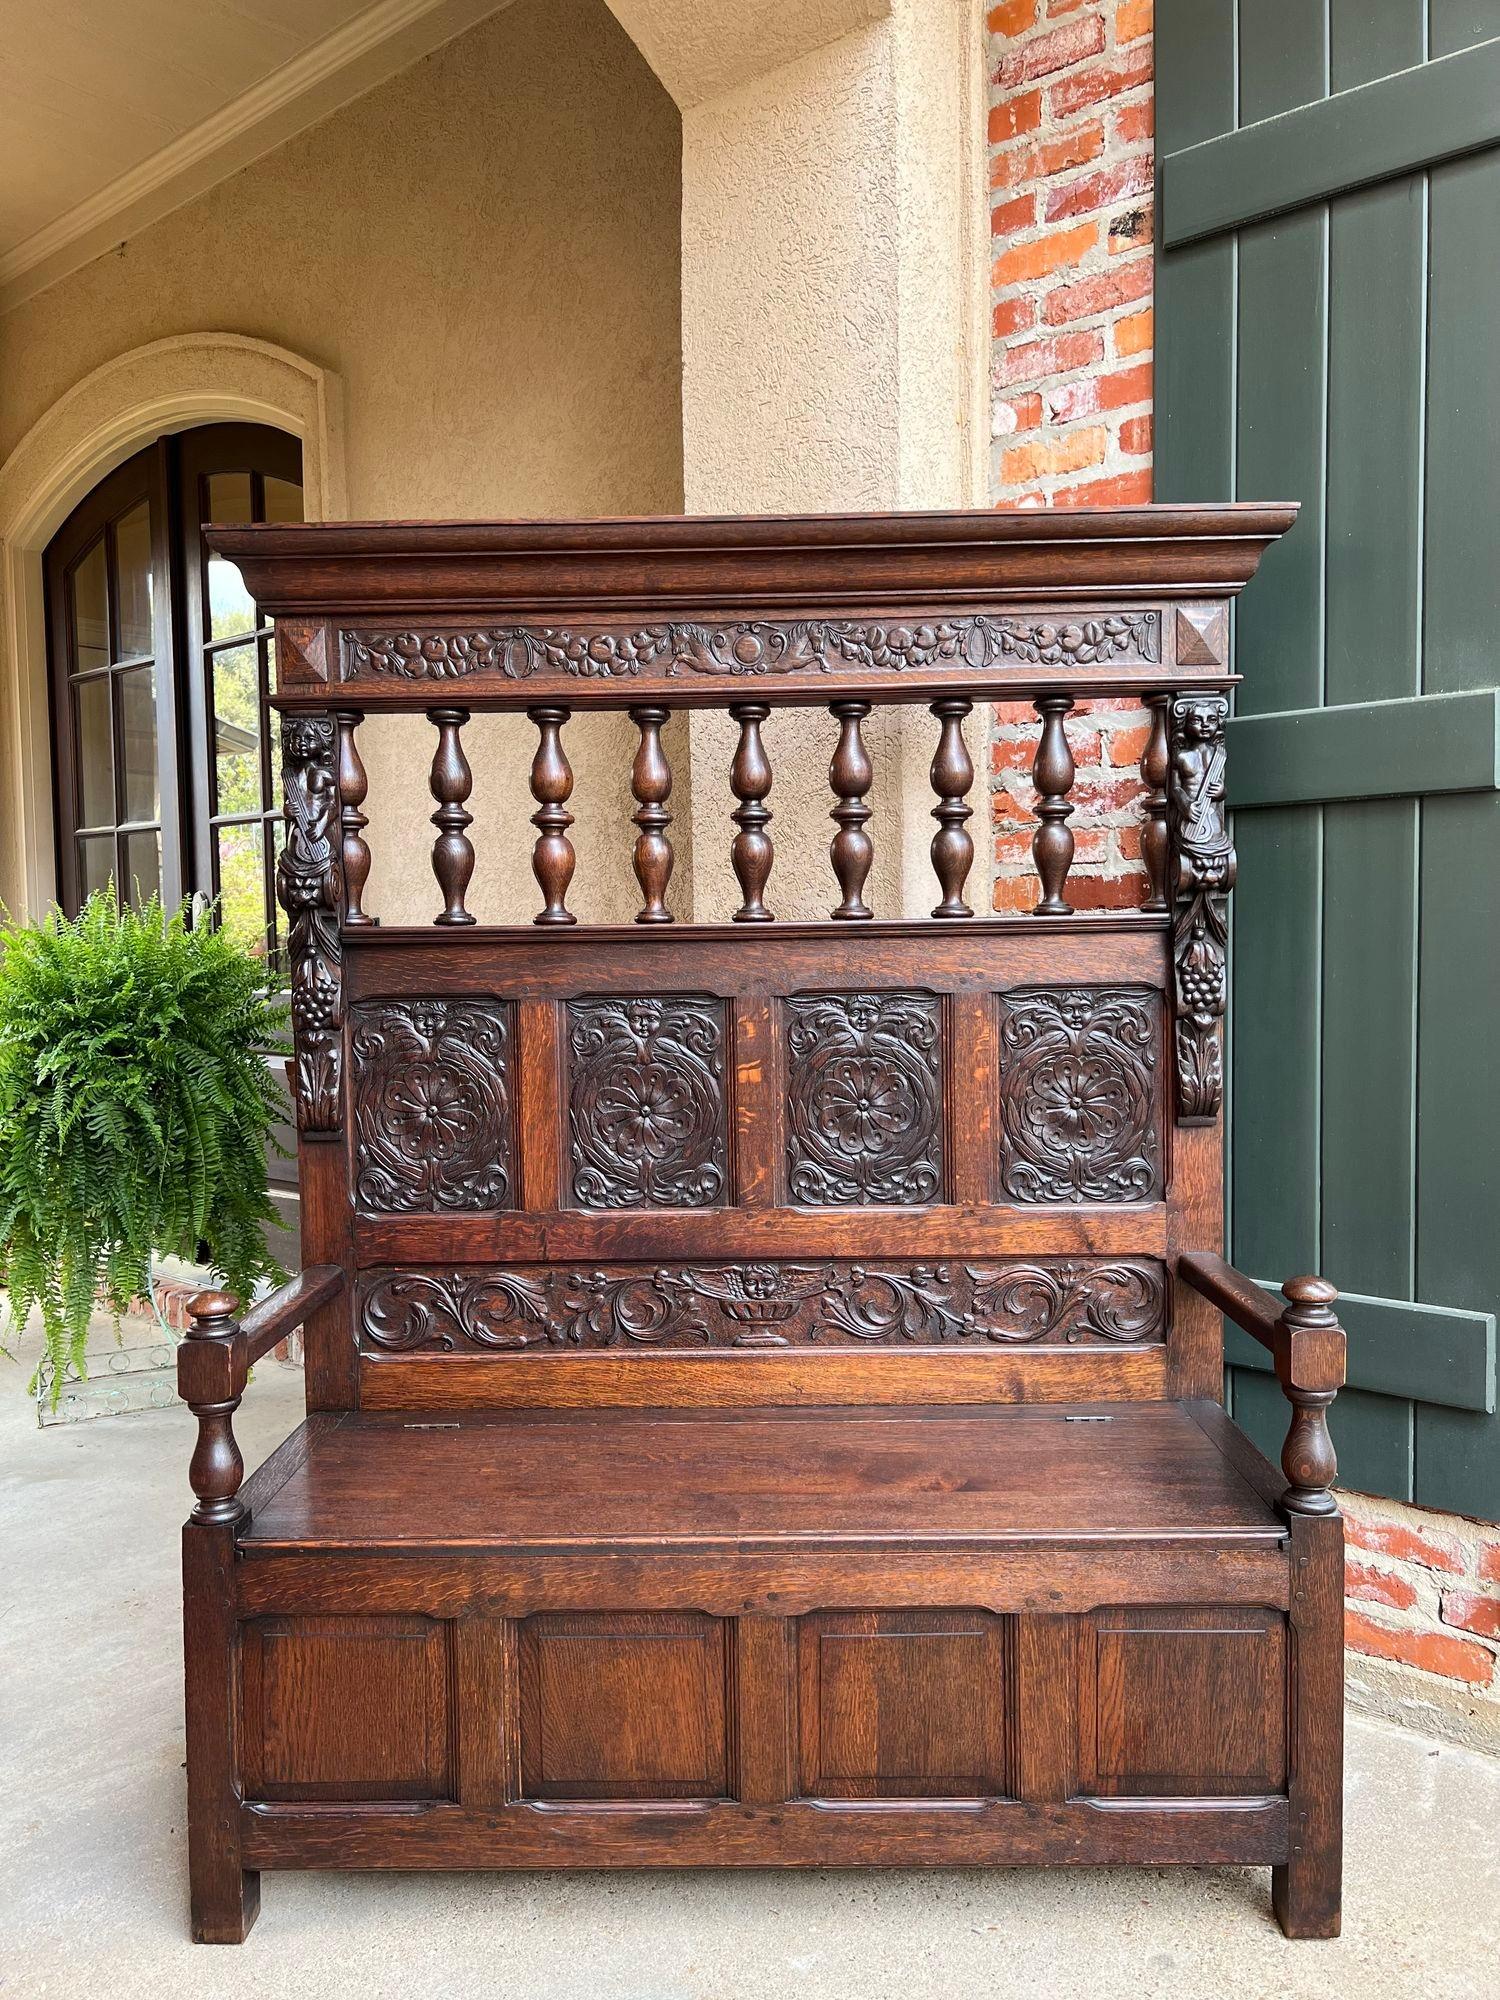 19th century French Hall Bench Settle Renaissance Carved Oak Cherub Black Forest.

Direct from France, a beautiful antique French hall bench, large enough for any home or castle!
The 5.5 ft. back features a large crown over a carved band of fruits